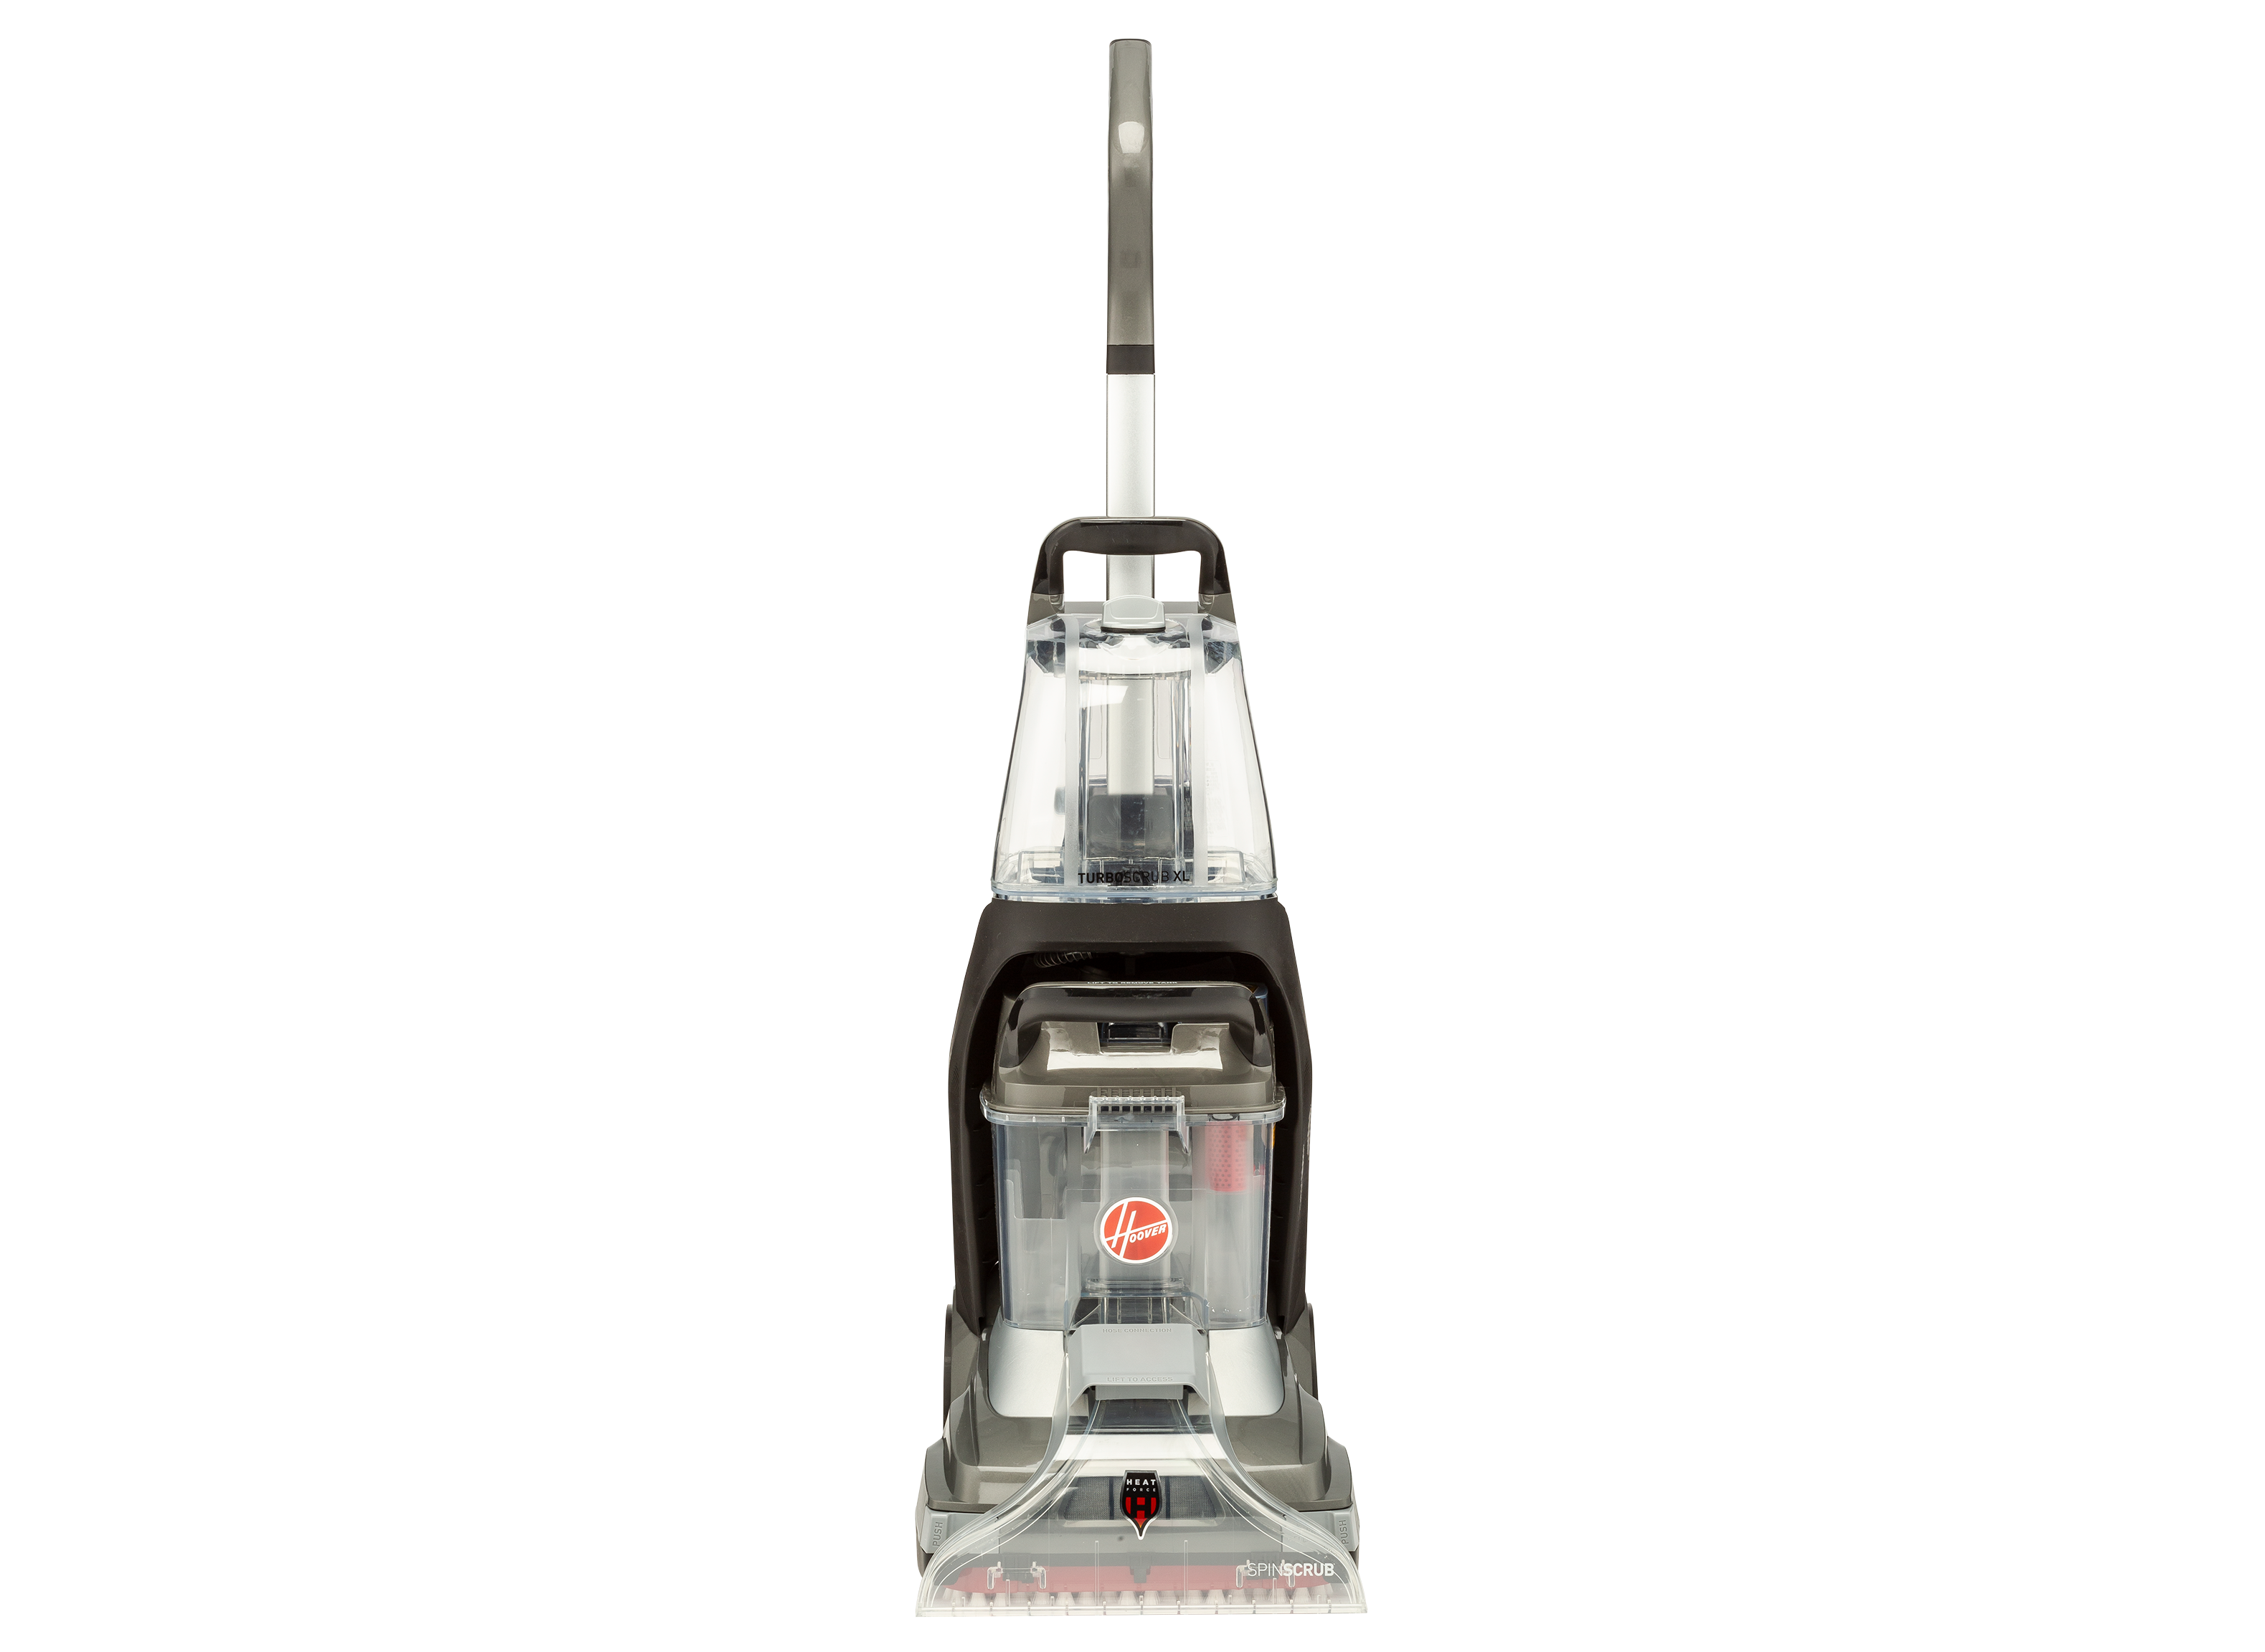 https://crdms.images.consumerreports.org/prod/products/cr/models/407693-full-sized-carpet-cleaners-hoover-powerdash-pet-advanced-fh55000-10032533.png